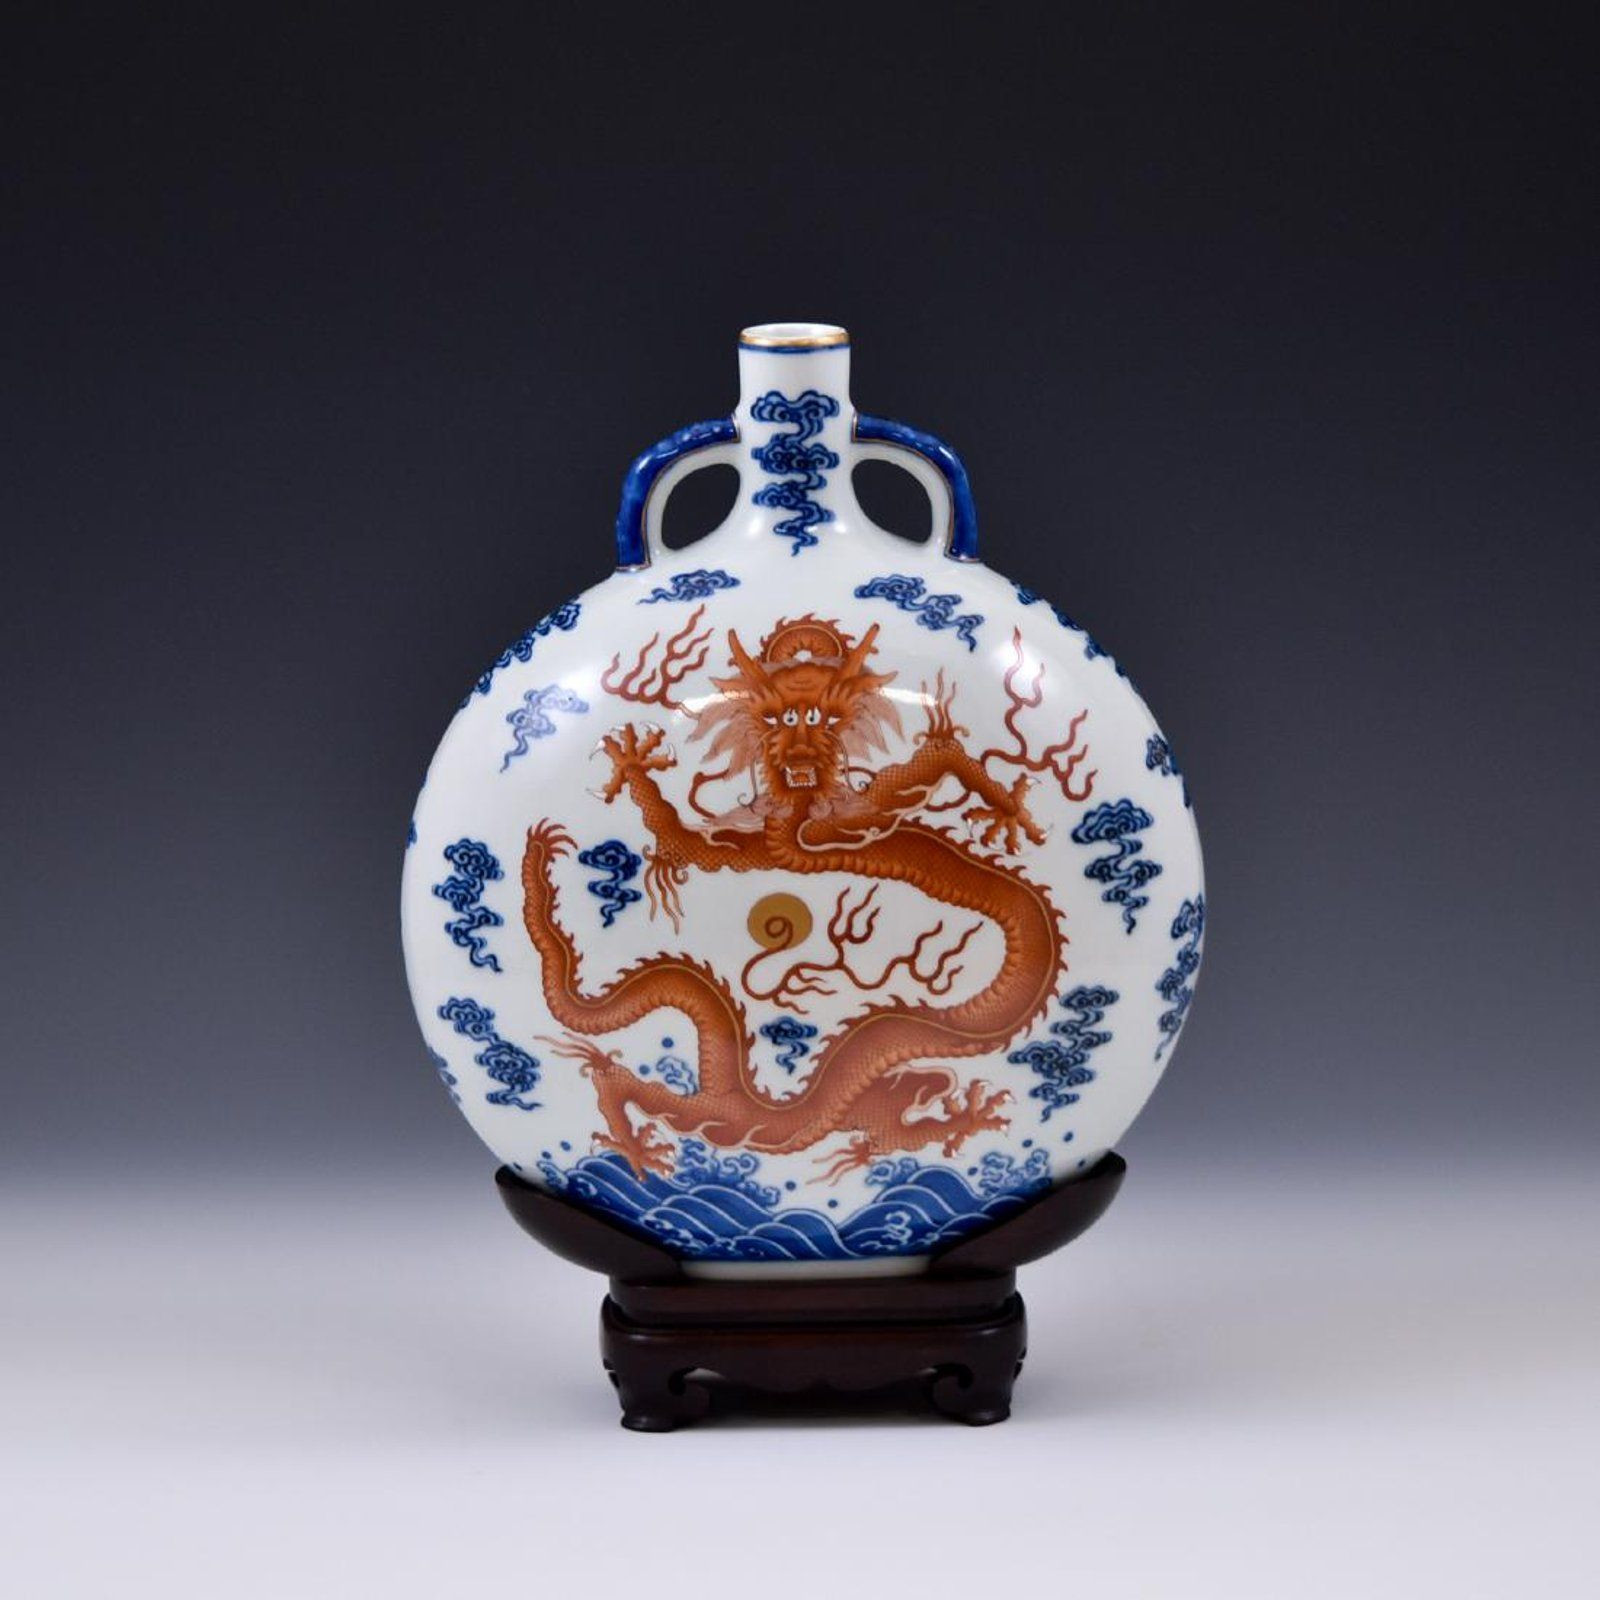 11 attractive Chinese Vase with Stand 2024 free download chinese vase with stand of chinese red blue dragon porcelain moon vase on stand on chinese intended for chinese red blue dragon porcelain moon vase on stand qing dynasty